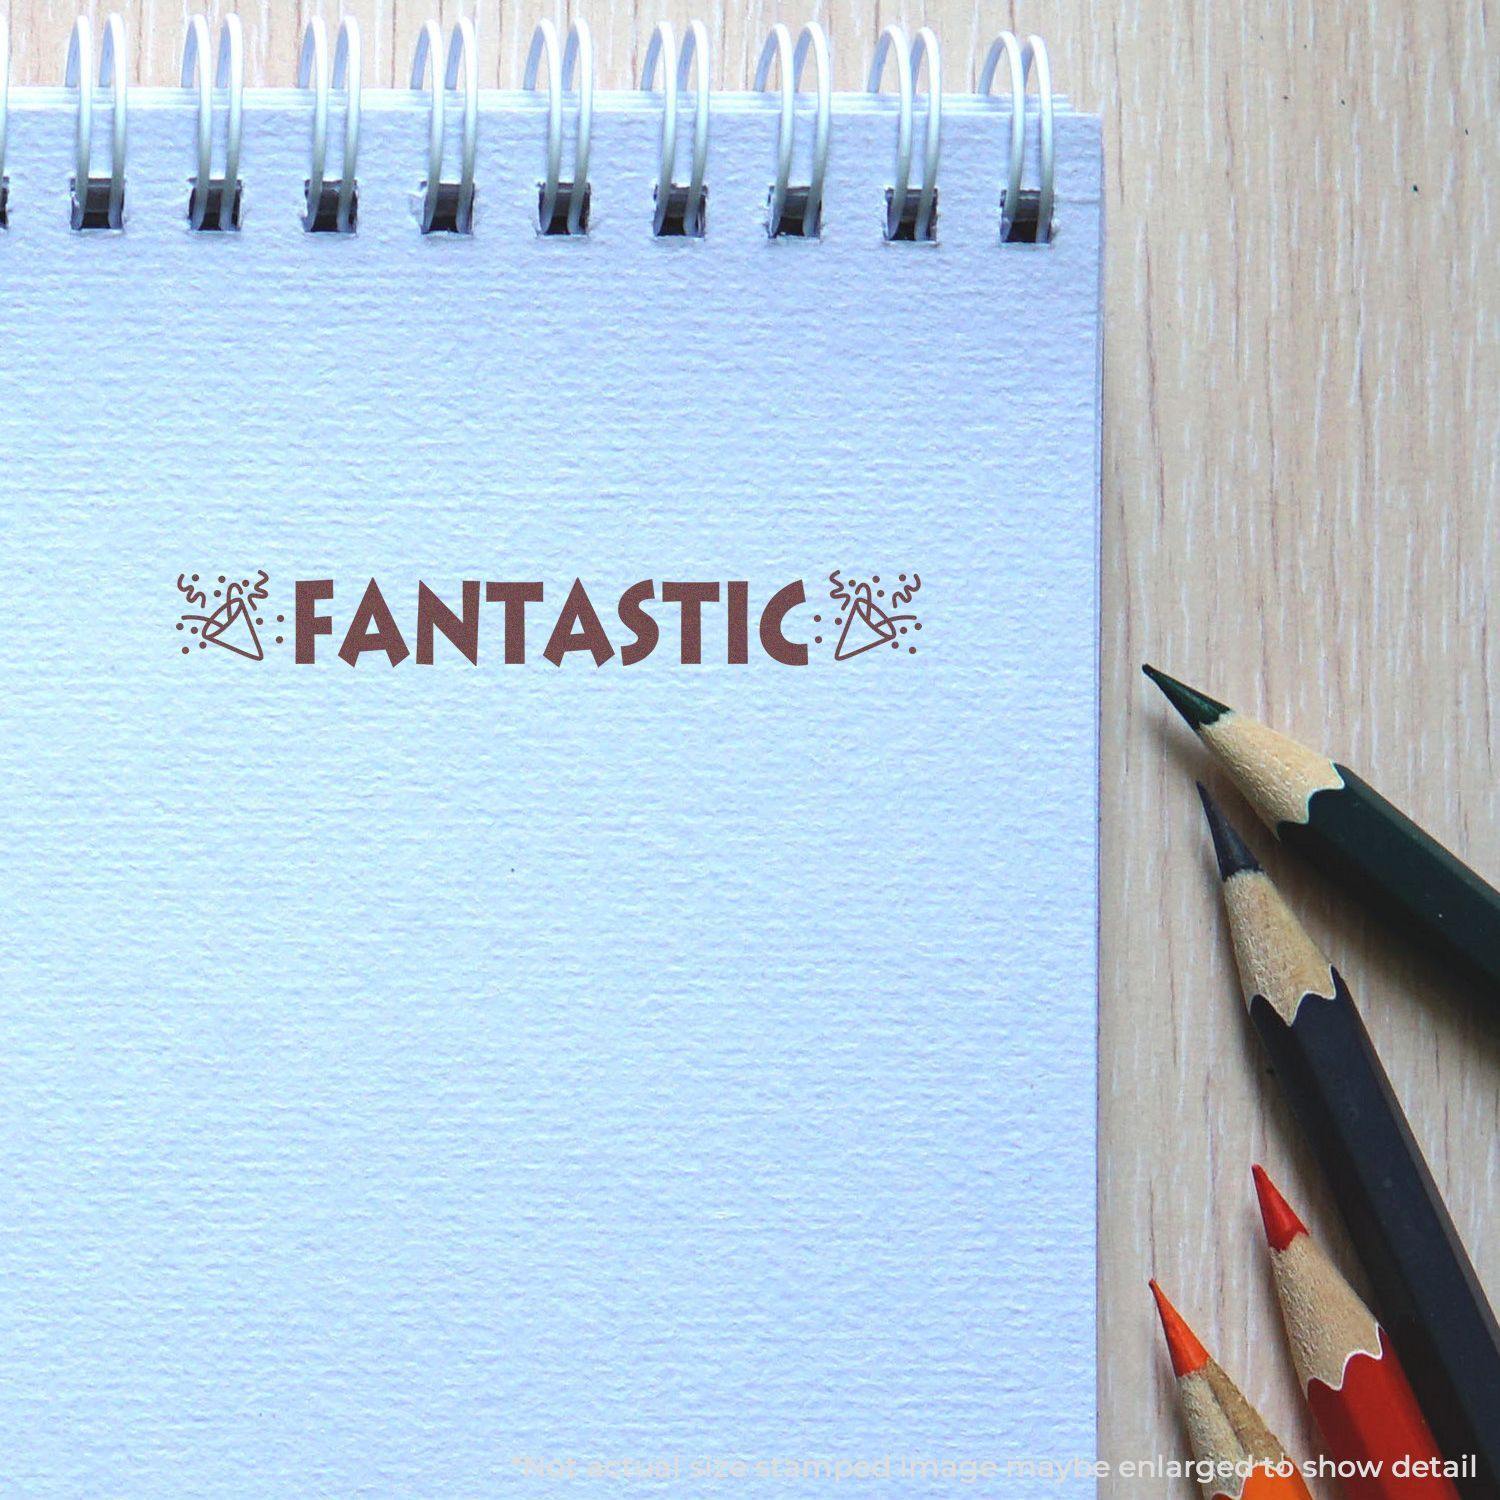 A stock office pre-inked stamp with a stamped image showing how the text "FANTASTIC" in bold, jagged letters and noise blowers icons on each side of the text is displayed after stamping.